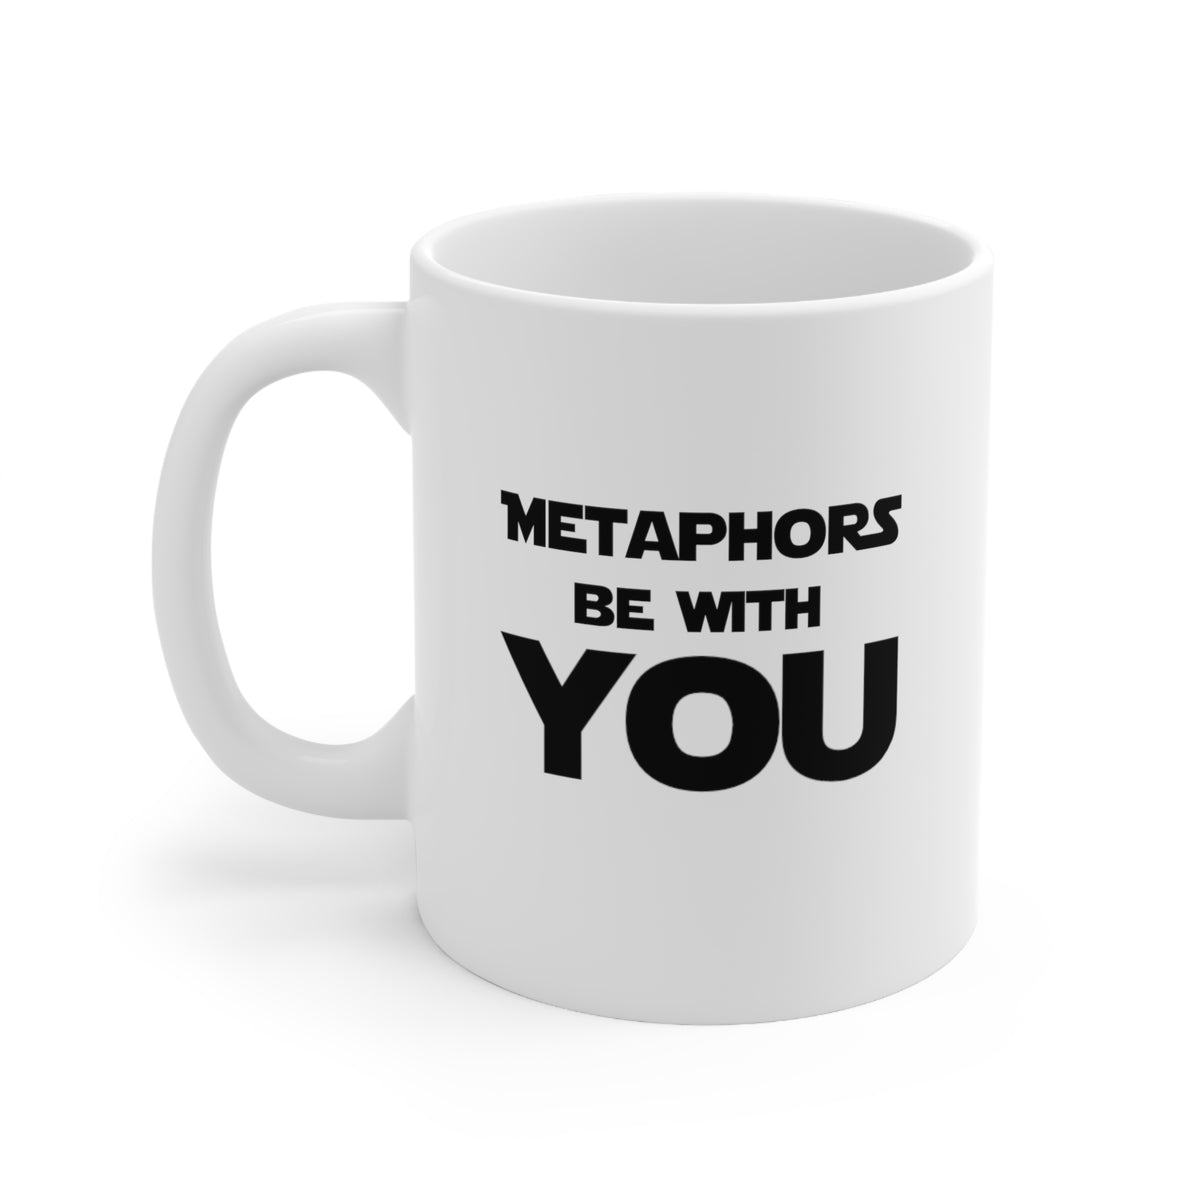 Fun Grammar Teacher Coffee Mug - Metaphors be with you Cup - Funny Gifts for Literature Majors & English